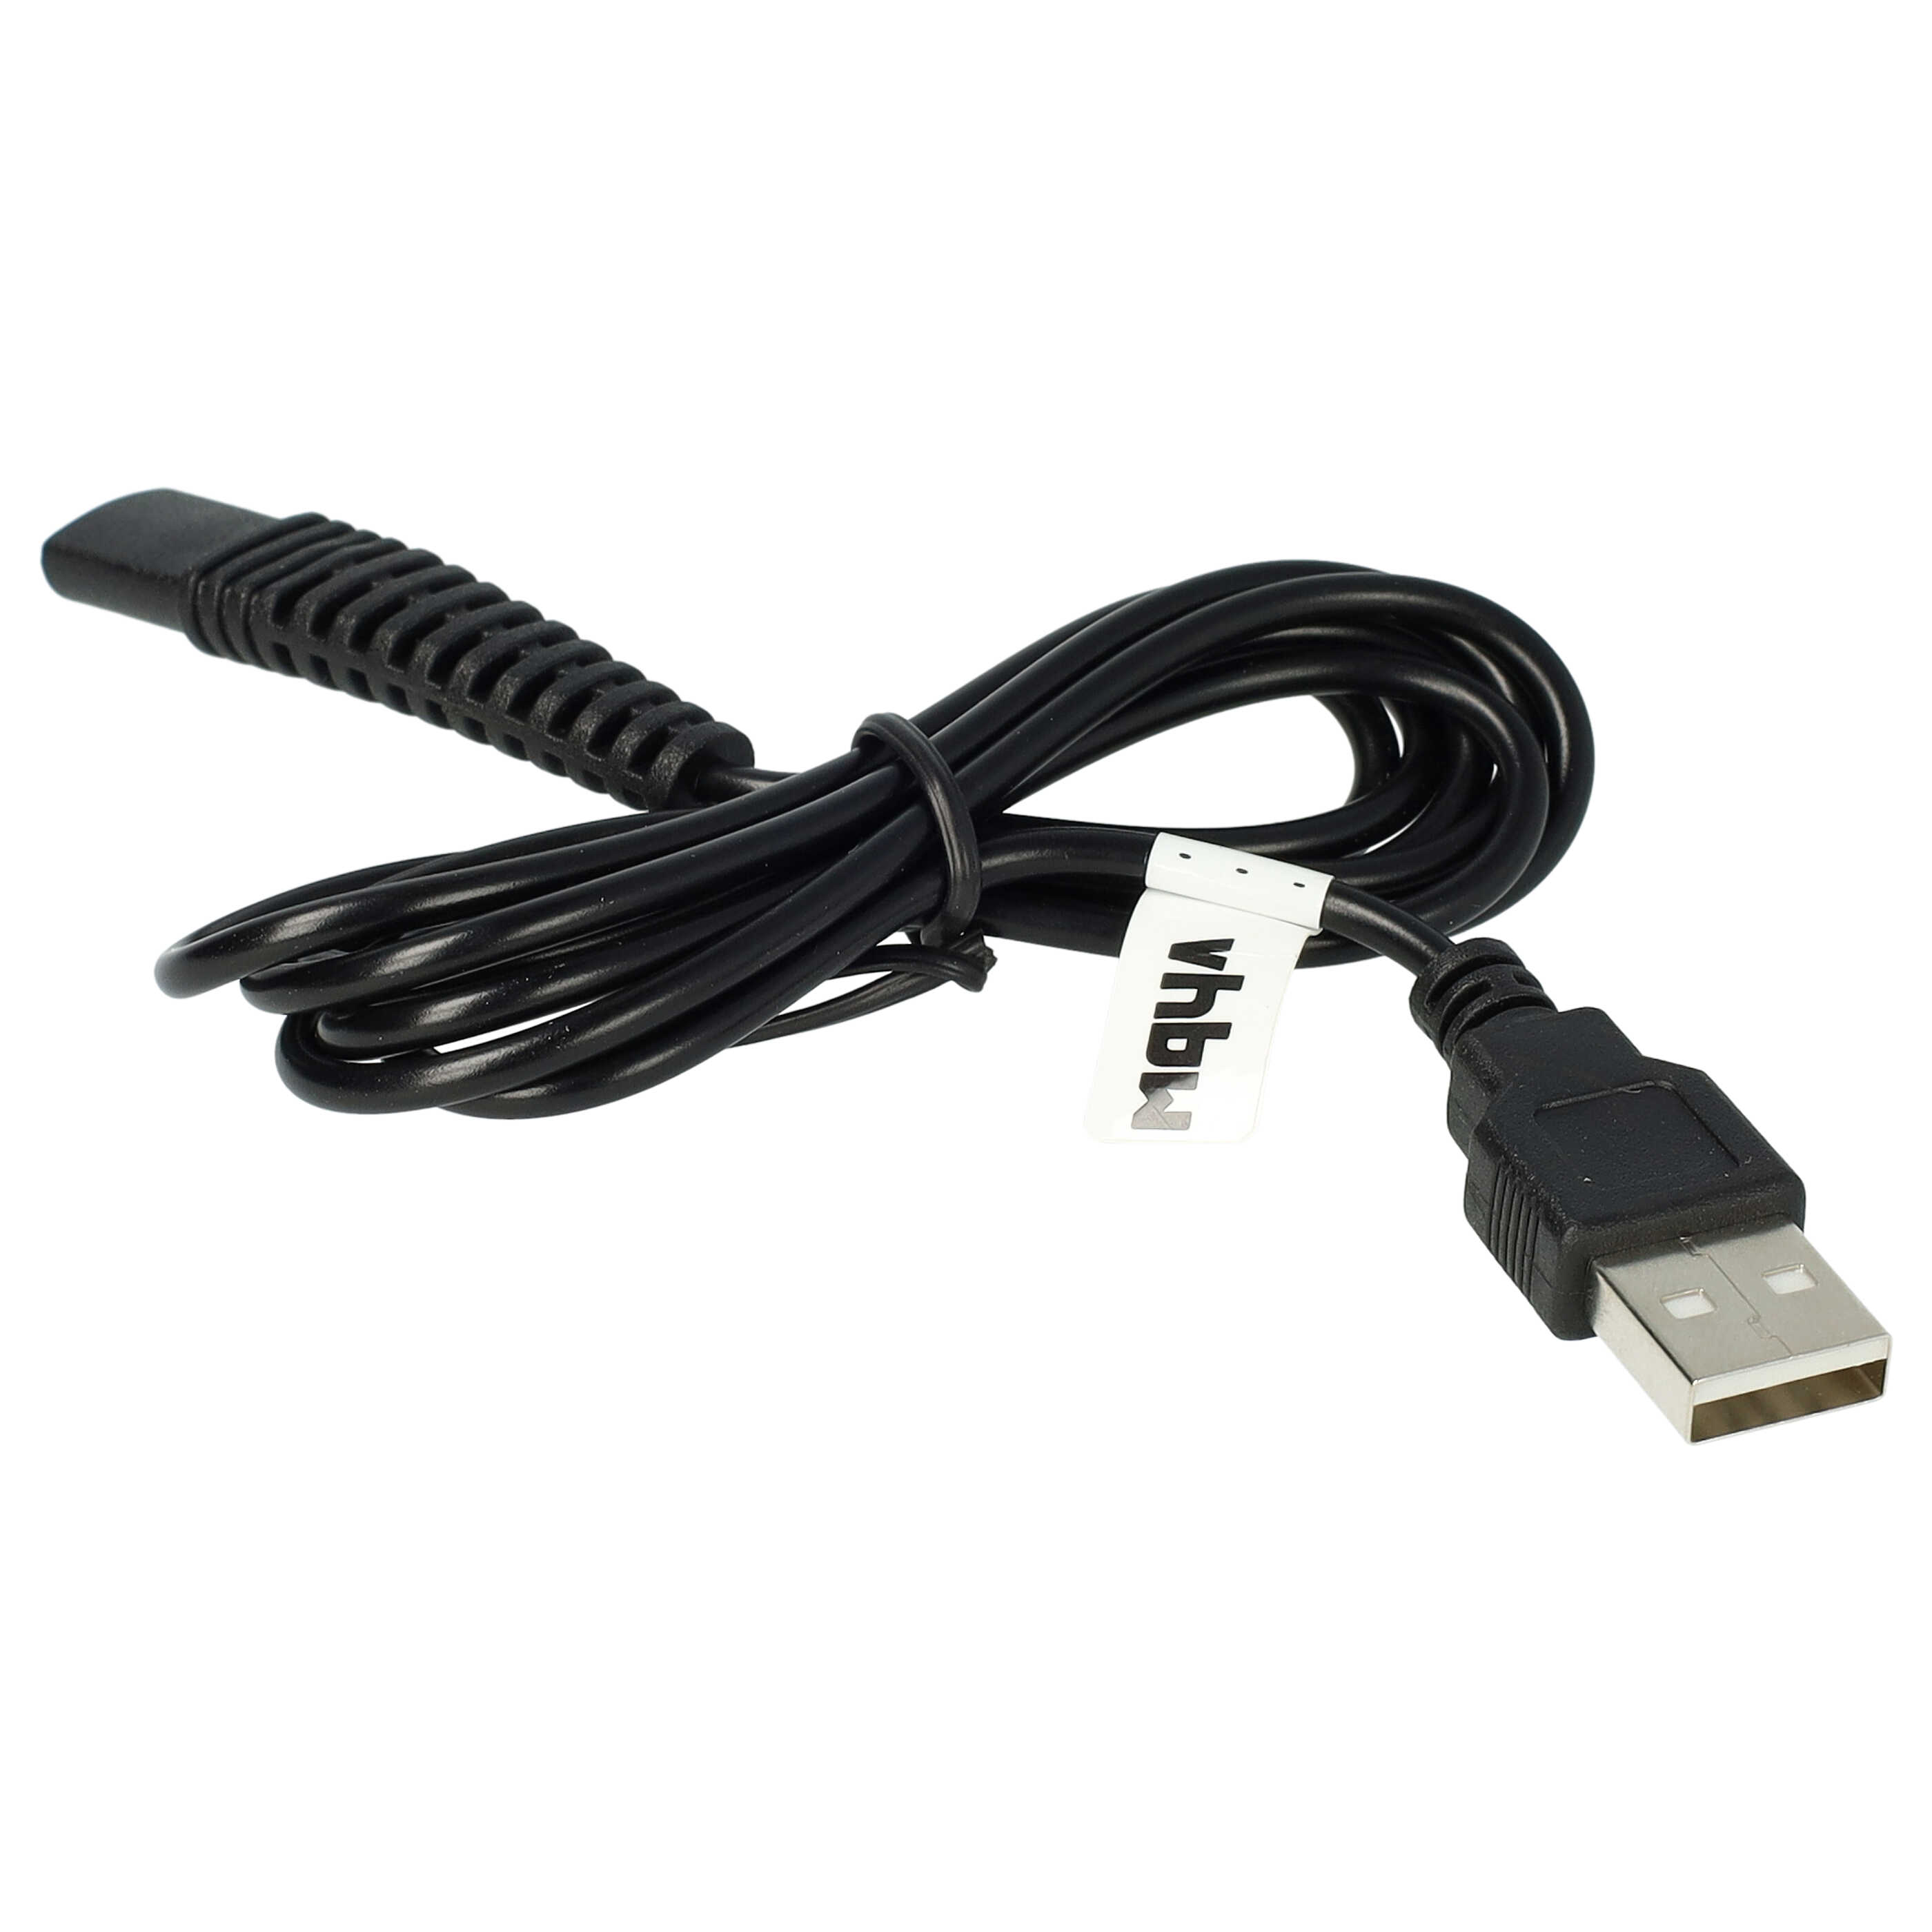 USB Charging Cable suitable for HC20 (5611) Braun, Oral-B HC20 (5611) Shaver, Toothbrush etc. - 120 cm